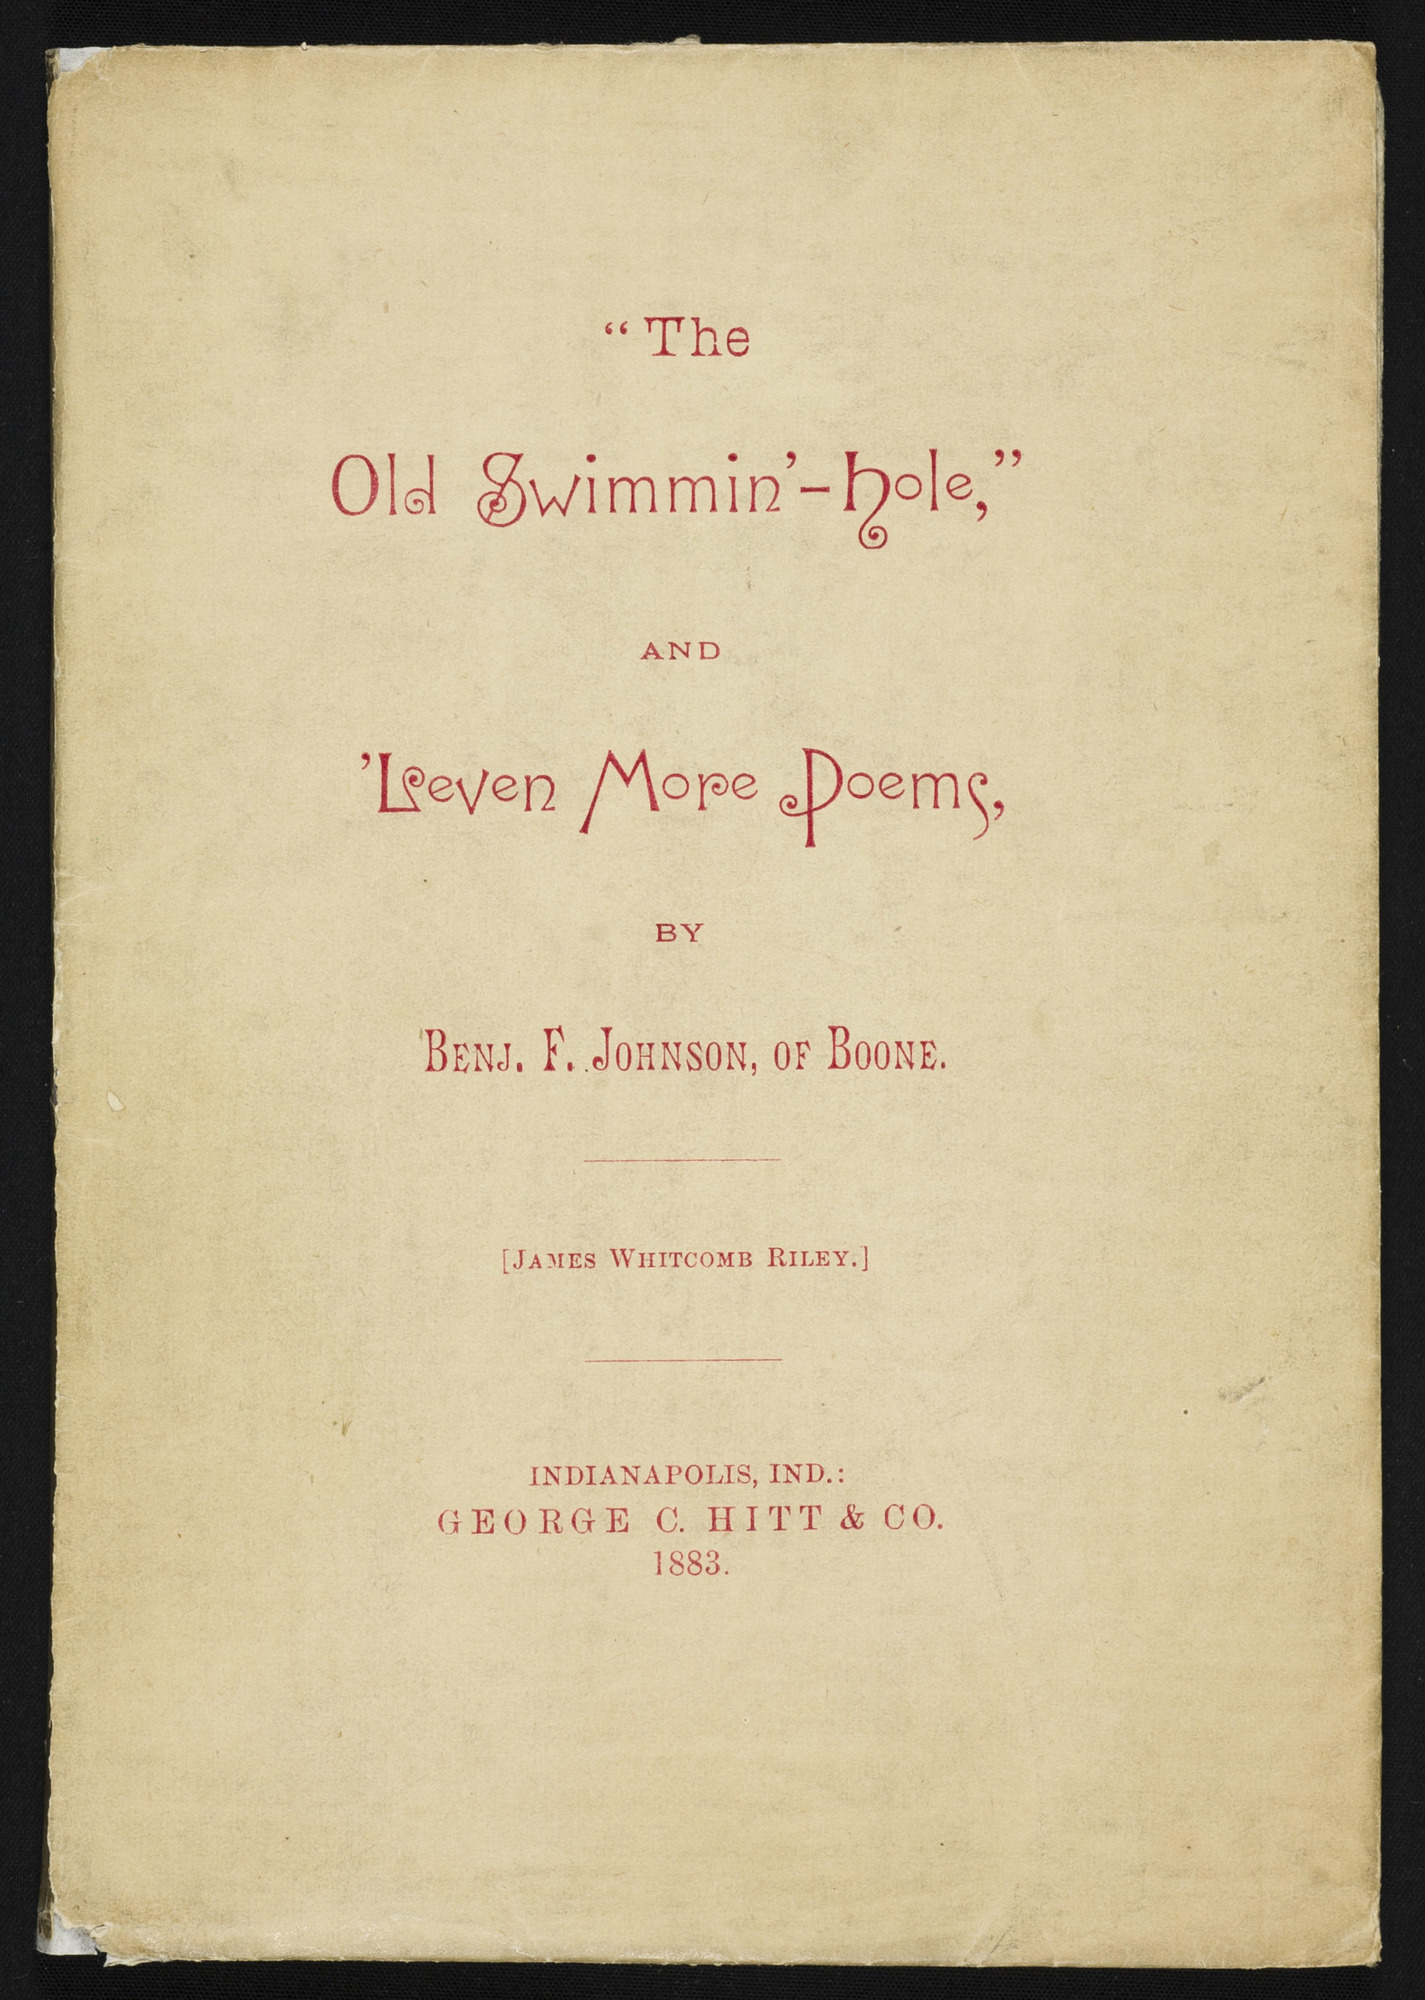 "The old swimmin'-hole", and, 'leven more poems